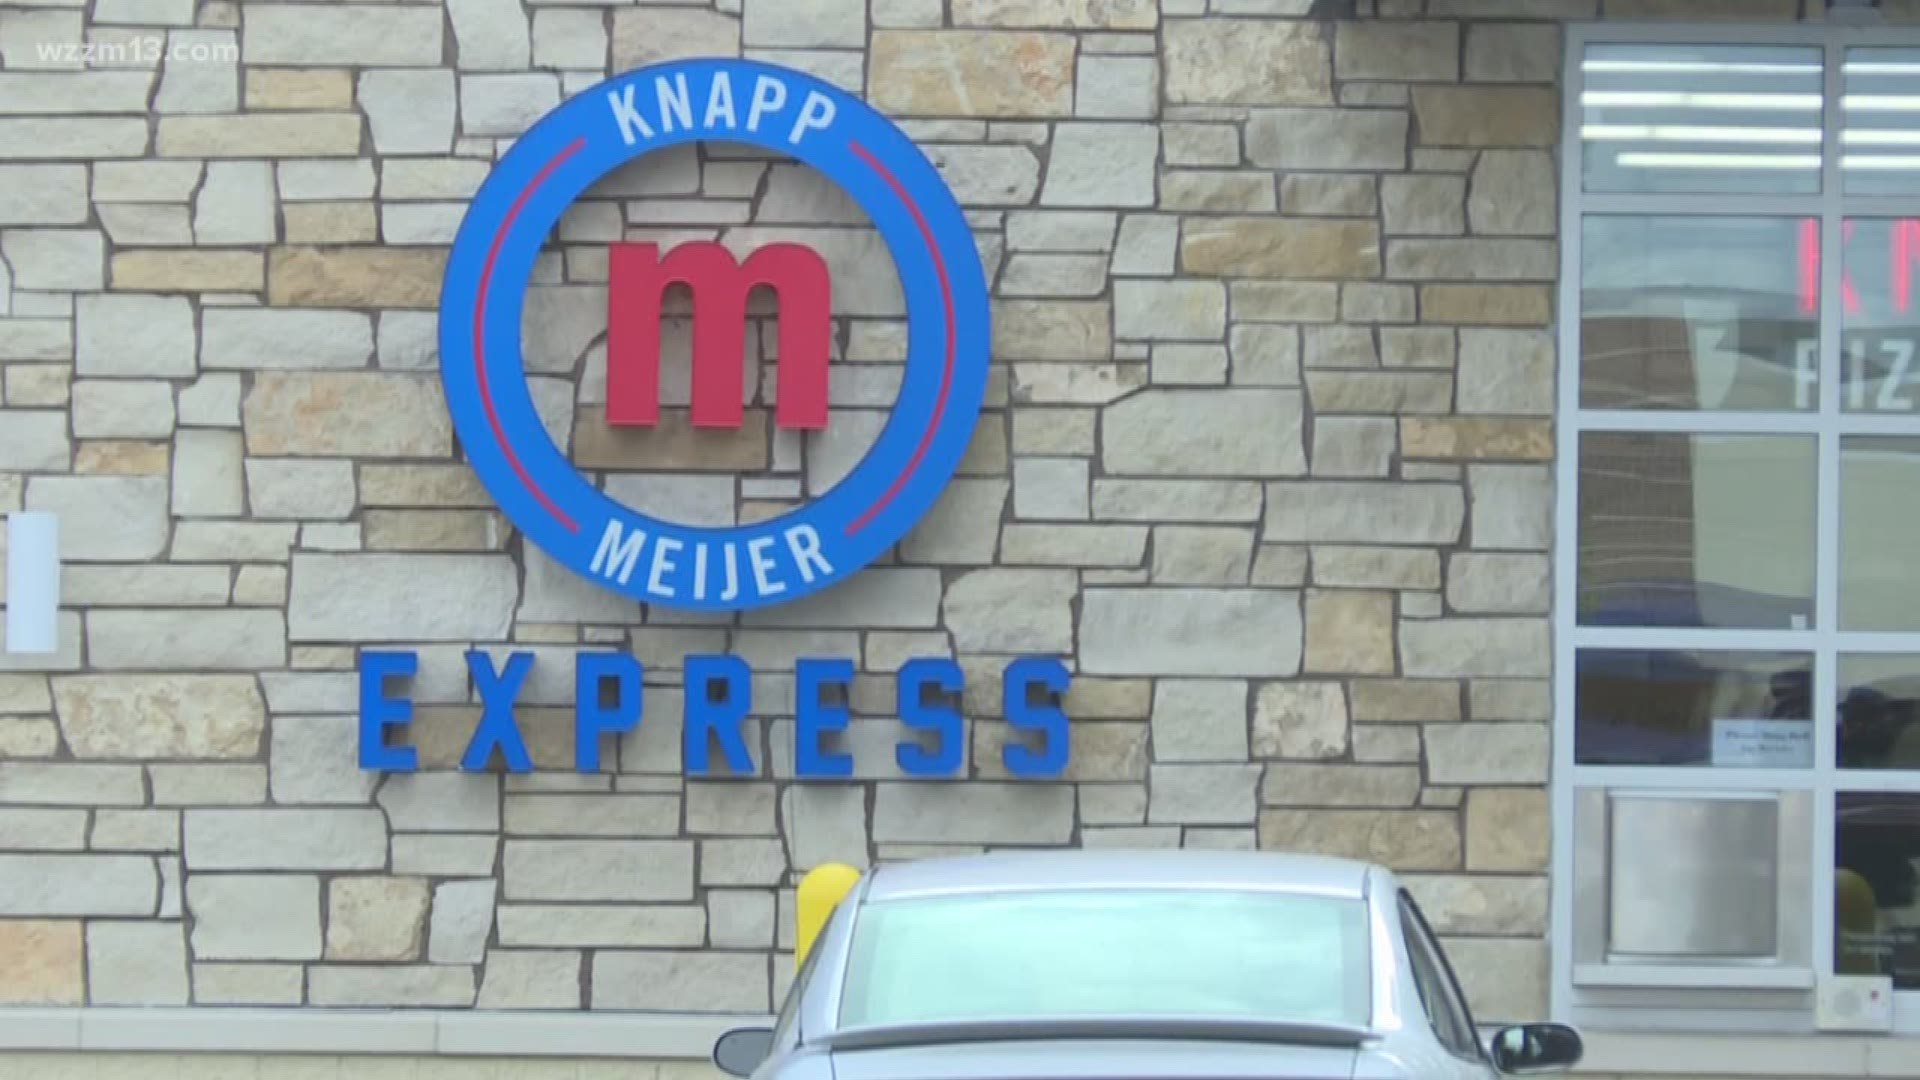 Meijer has opened yet another way to shop. The Meijer Express opened Friday, giving shoppers another way to grab-and-go!